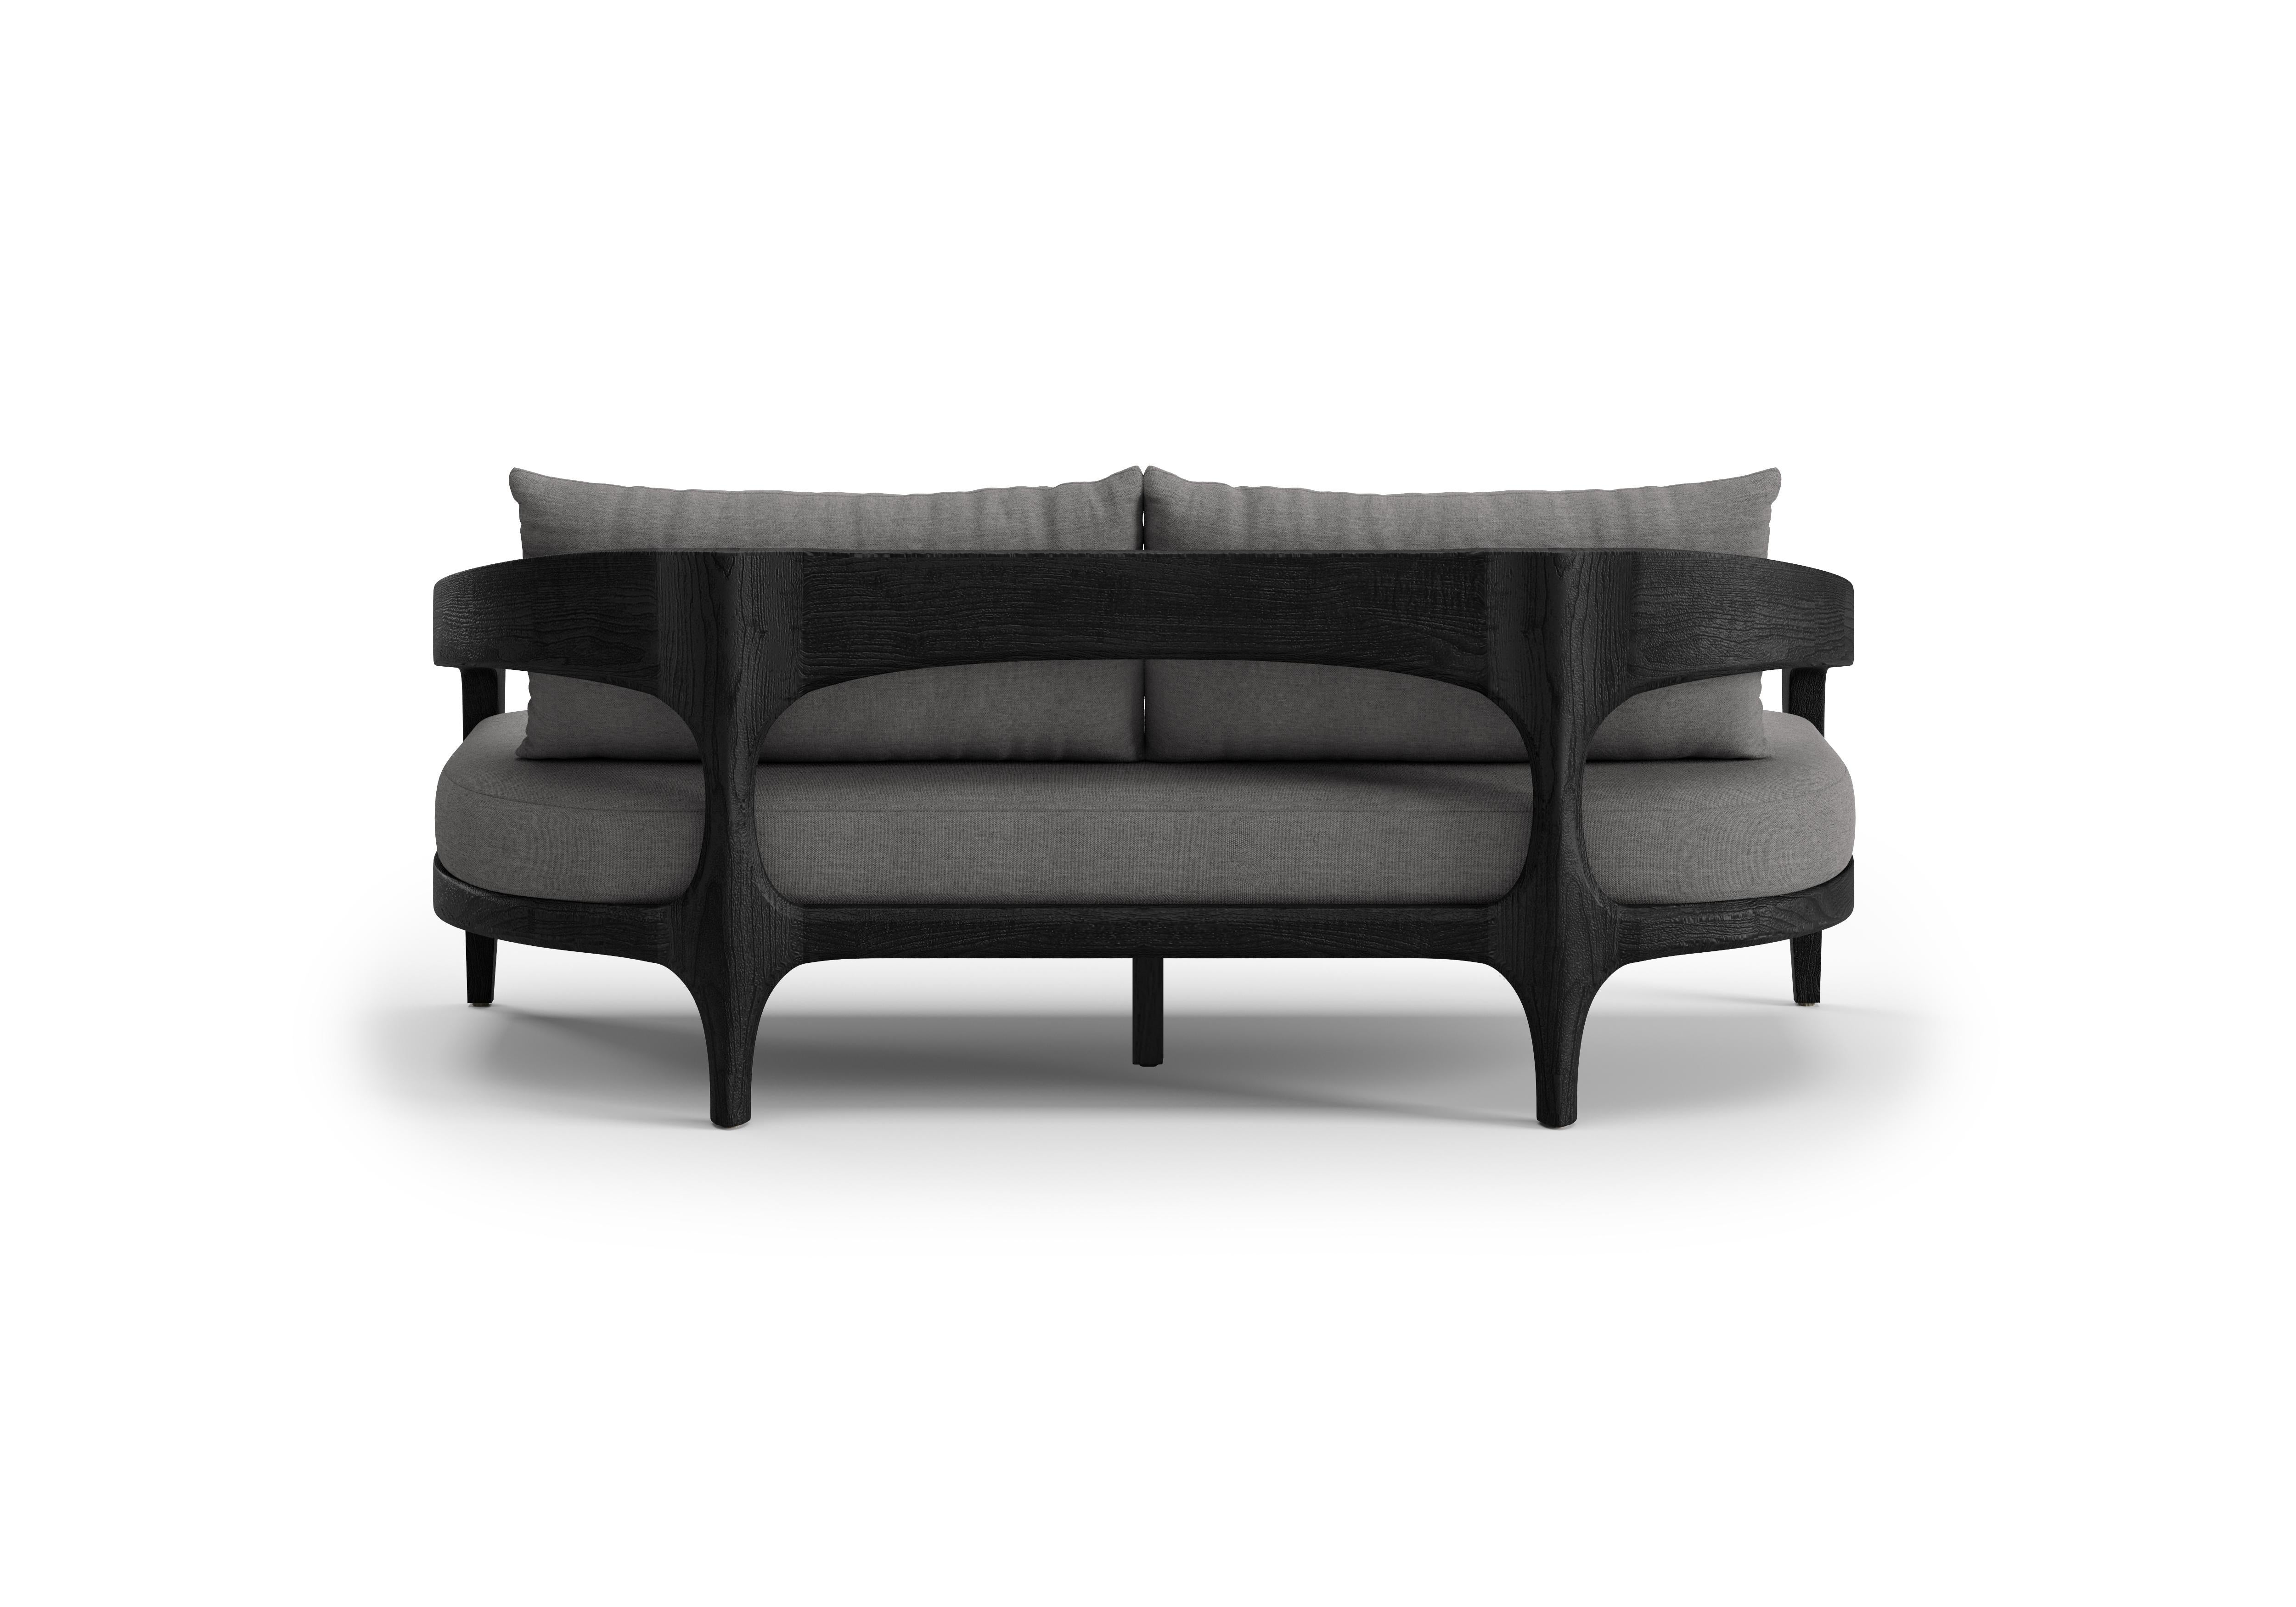 Hand-Crafted Whale-noche Outdoor 2 Seater Sofa by SNOC For Sale